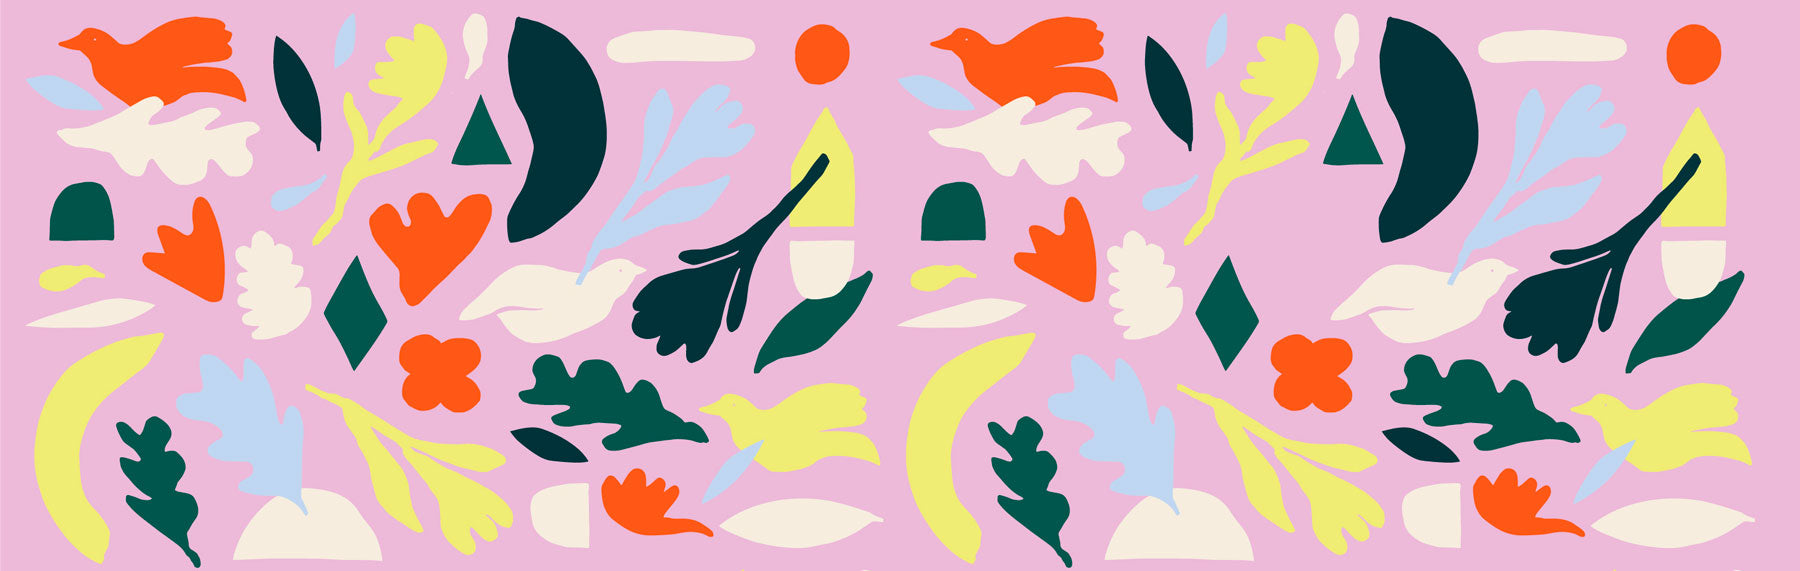 Flat Illustration by Baltic Club with birds, leaves and shapes